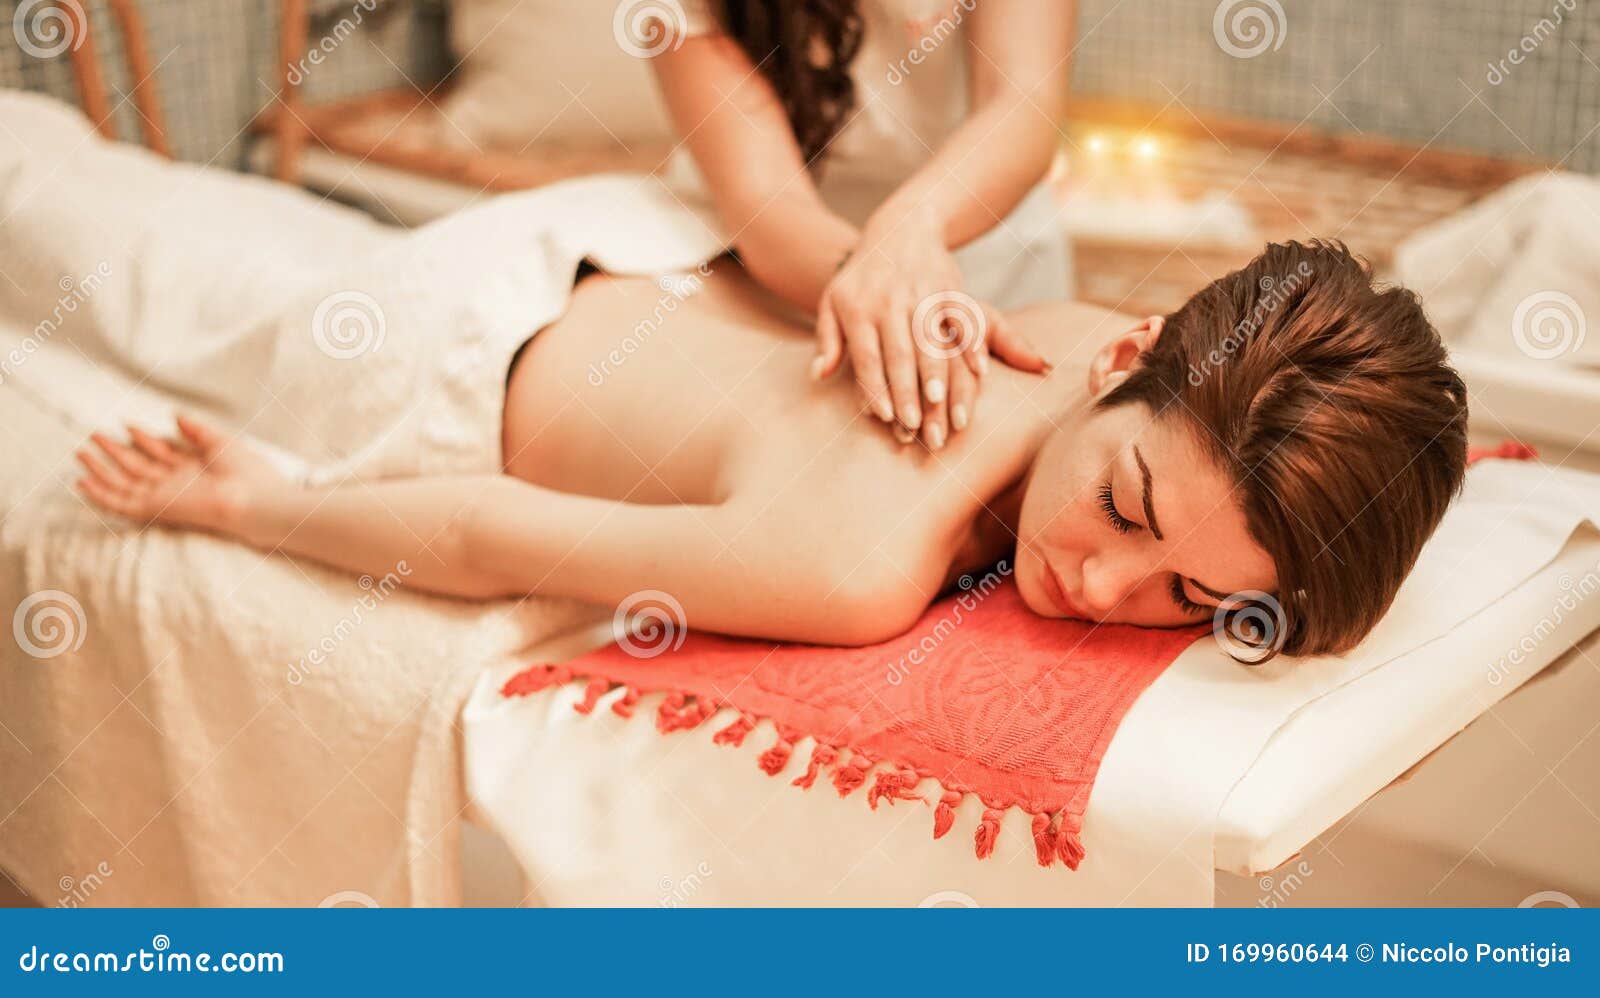 Young Woman Having Back Therapy Massage in Spa Resort Hotel Salon - Female Enjoying Relaxing Thai Massage - Body Care, Skin Care, Stock Photo picture